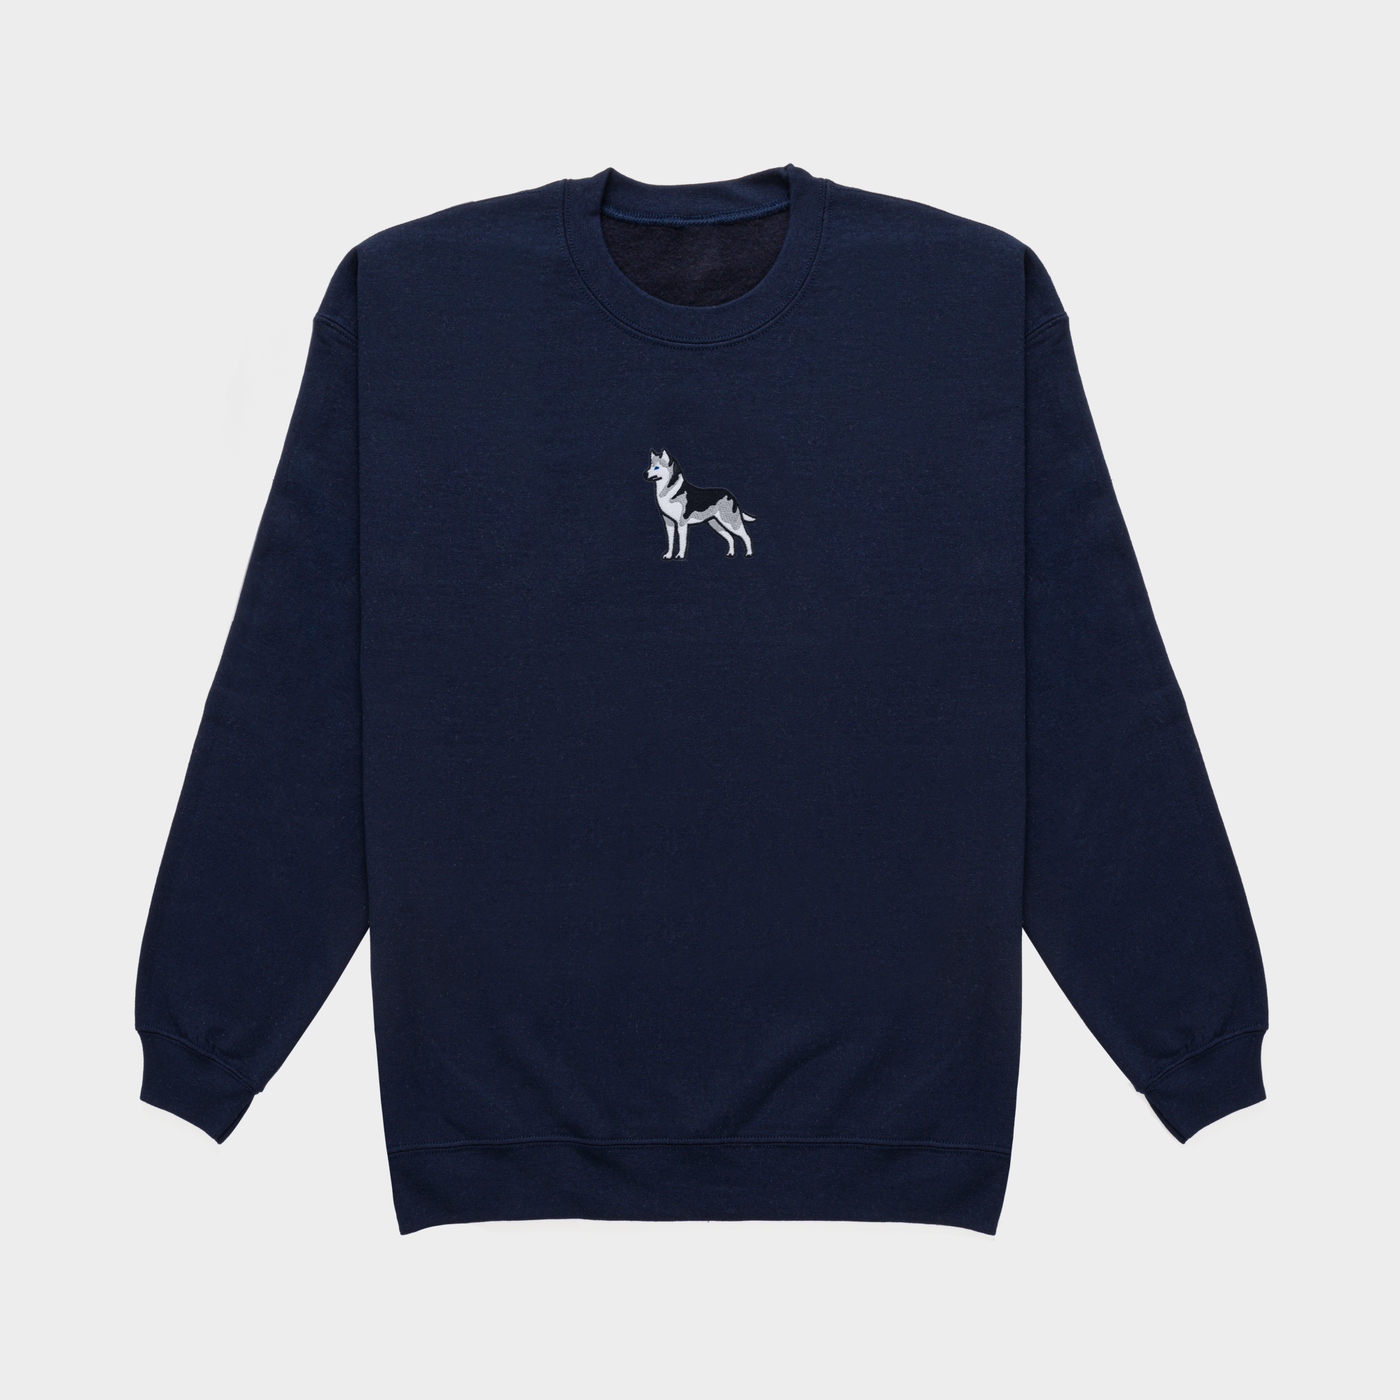 Bobby's Planet Women's Embroidered Siberian Husky Sweatshirt from Paws Dog Cat Animals Collection in Navy Color#color_navy